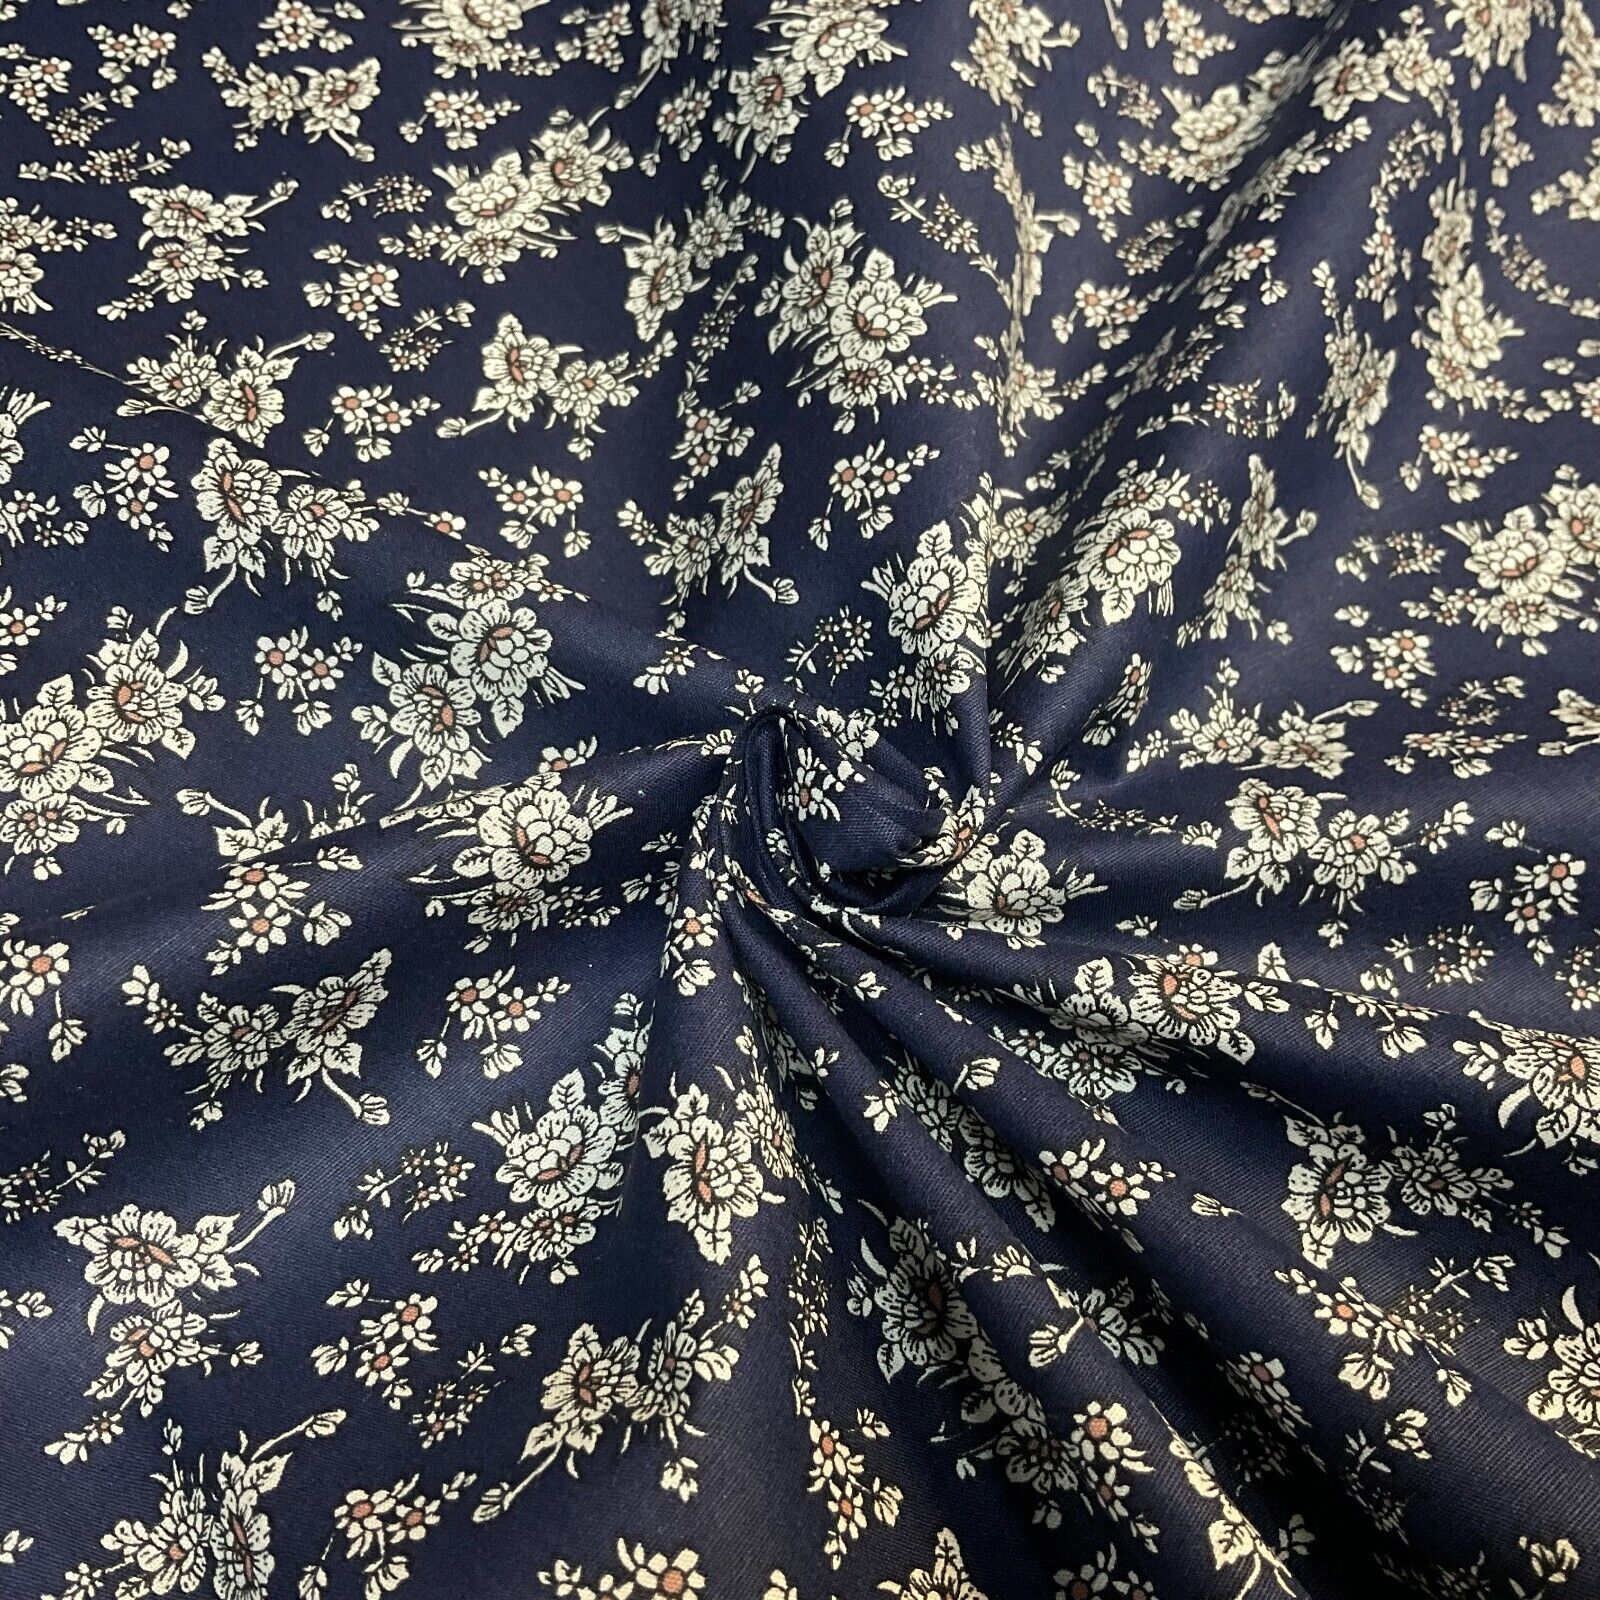 Small Vintage Floral 100% cotton printed dress craft fabric 150cm wide M1739